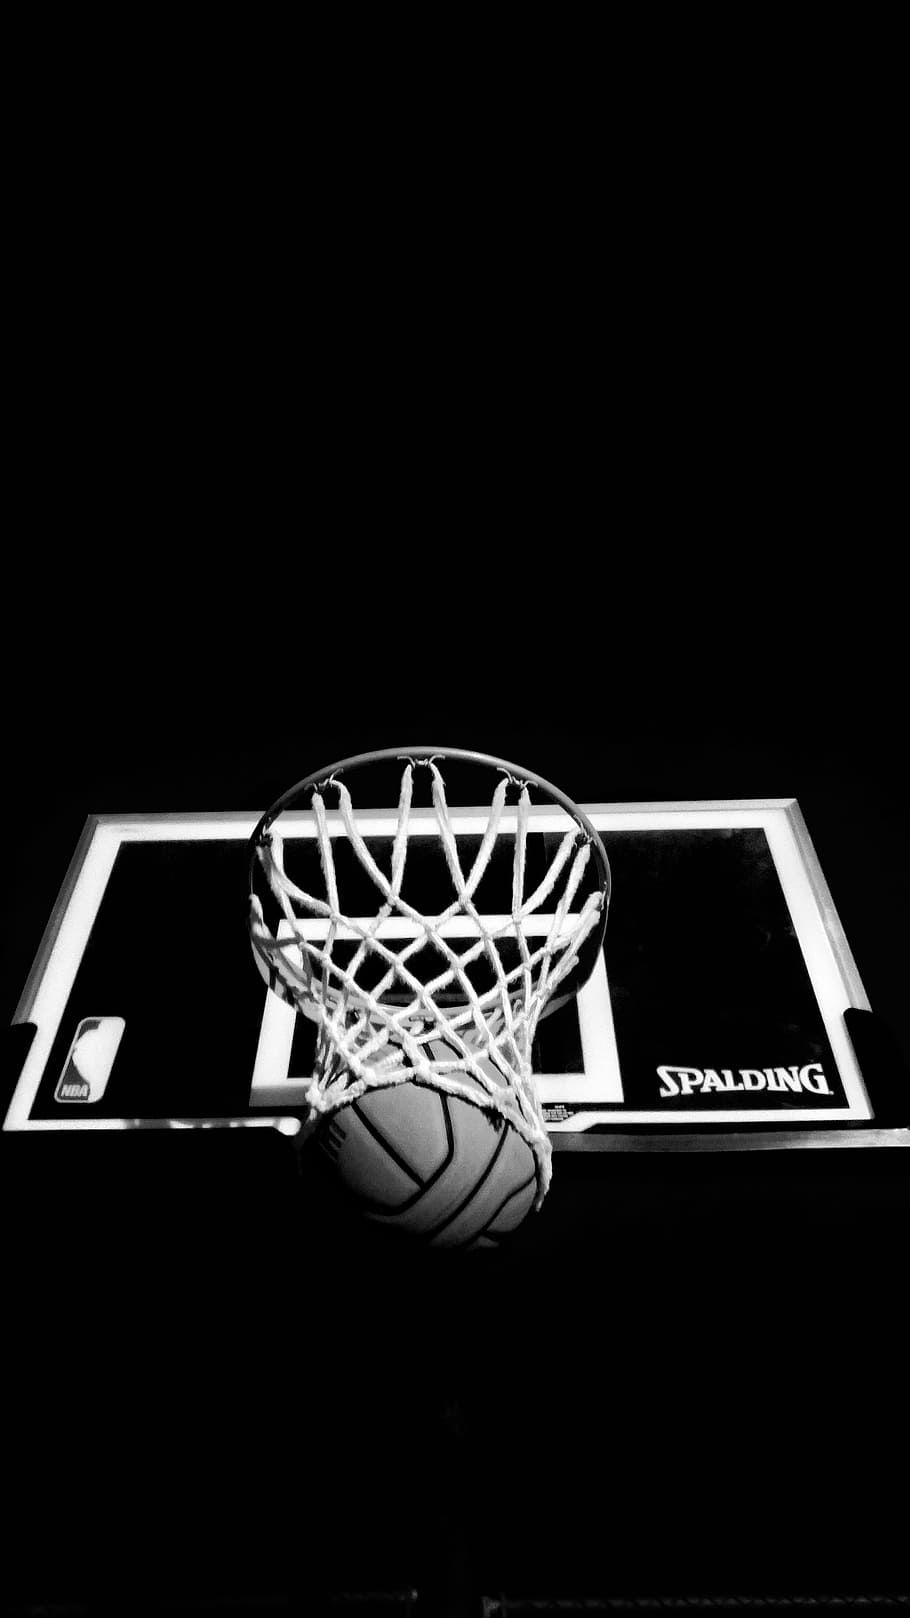 HD Wallpaper Grayscale Photography Of Spalding Basketball Hoop